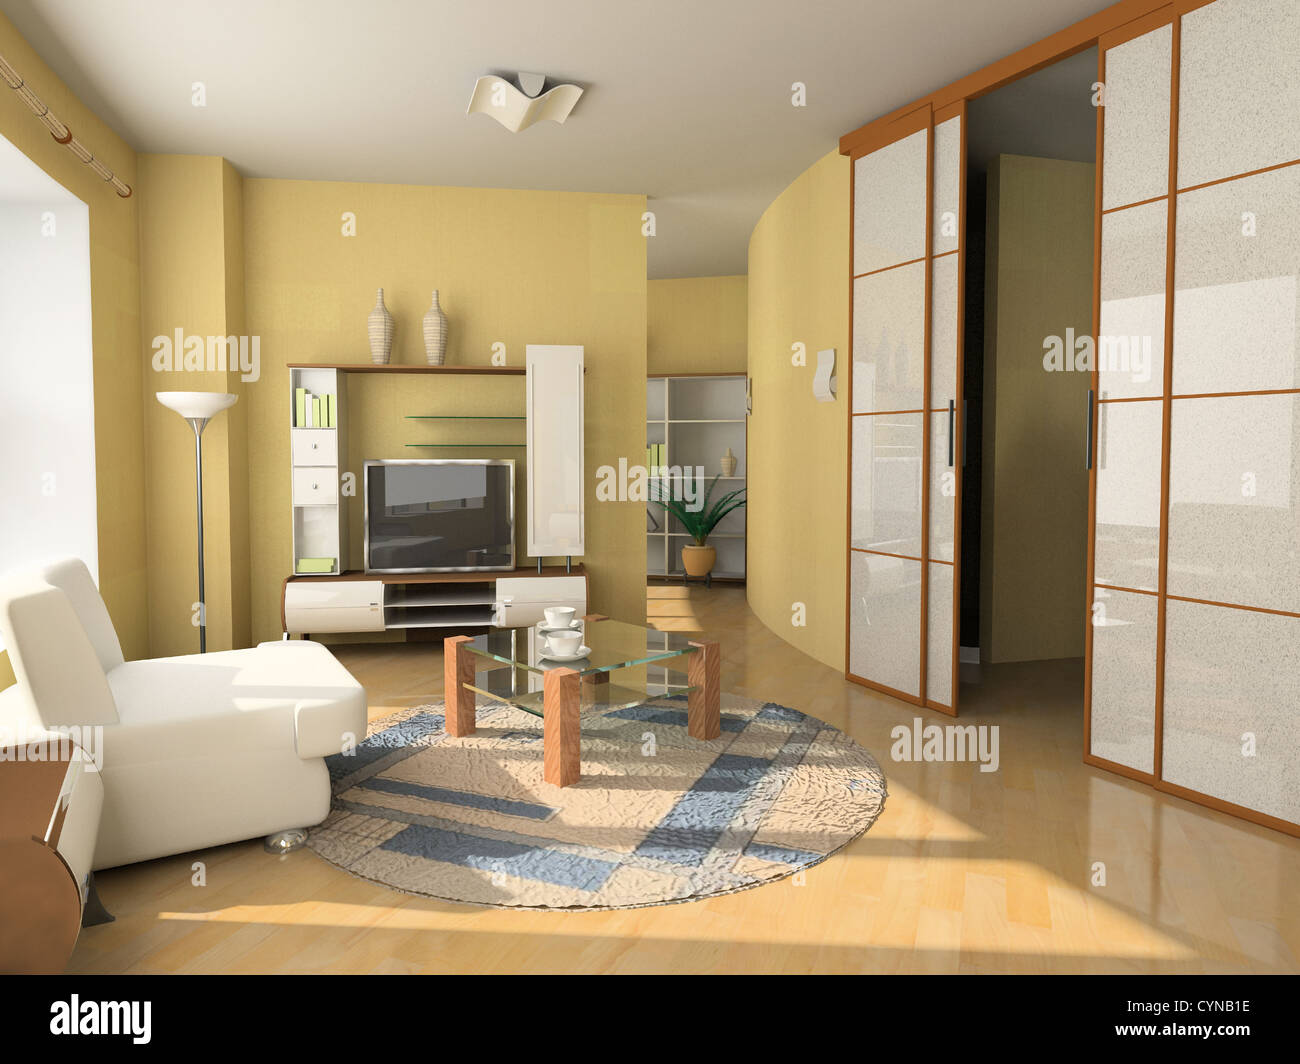 modern hotel interior design in modern style (private apartment 3d rendering) Stock Photo